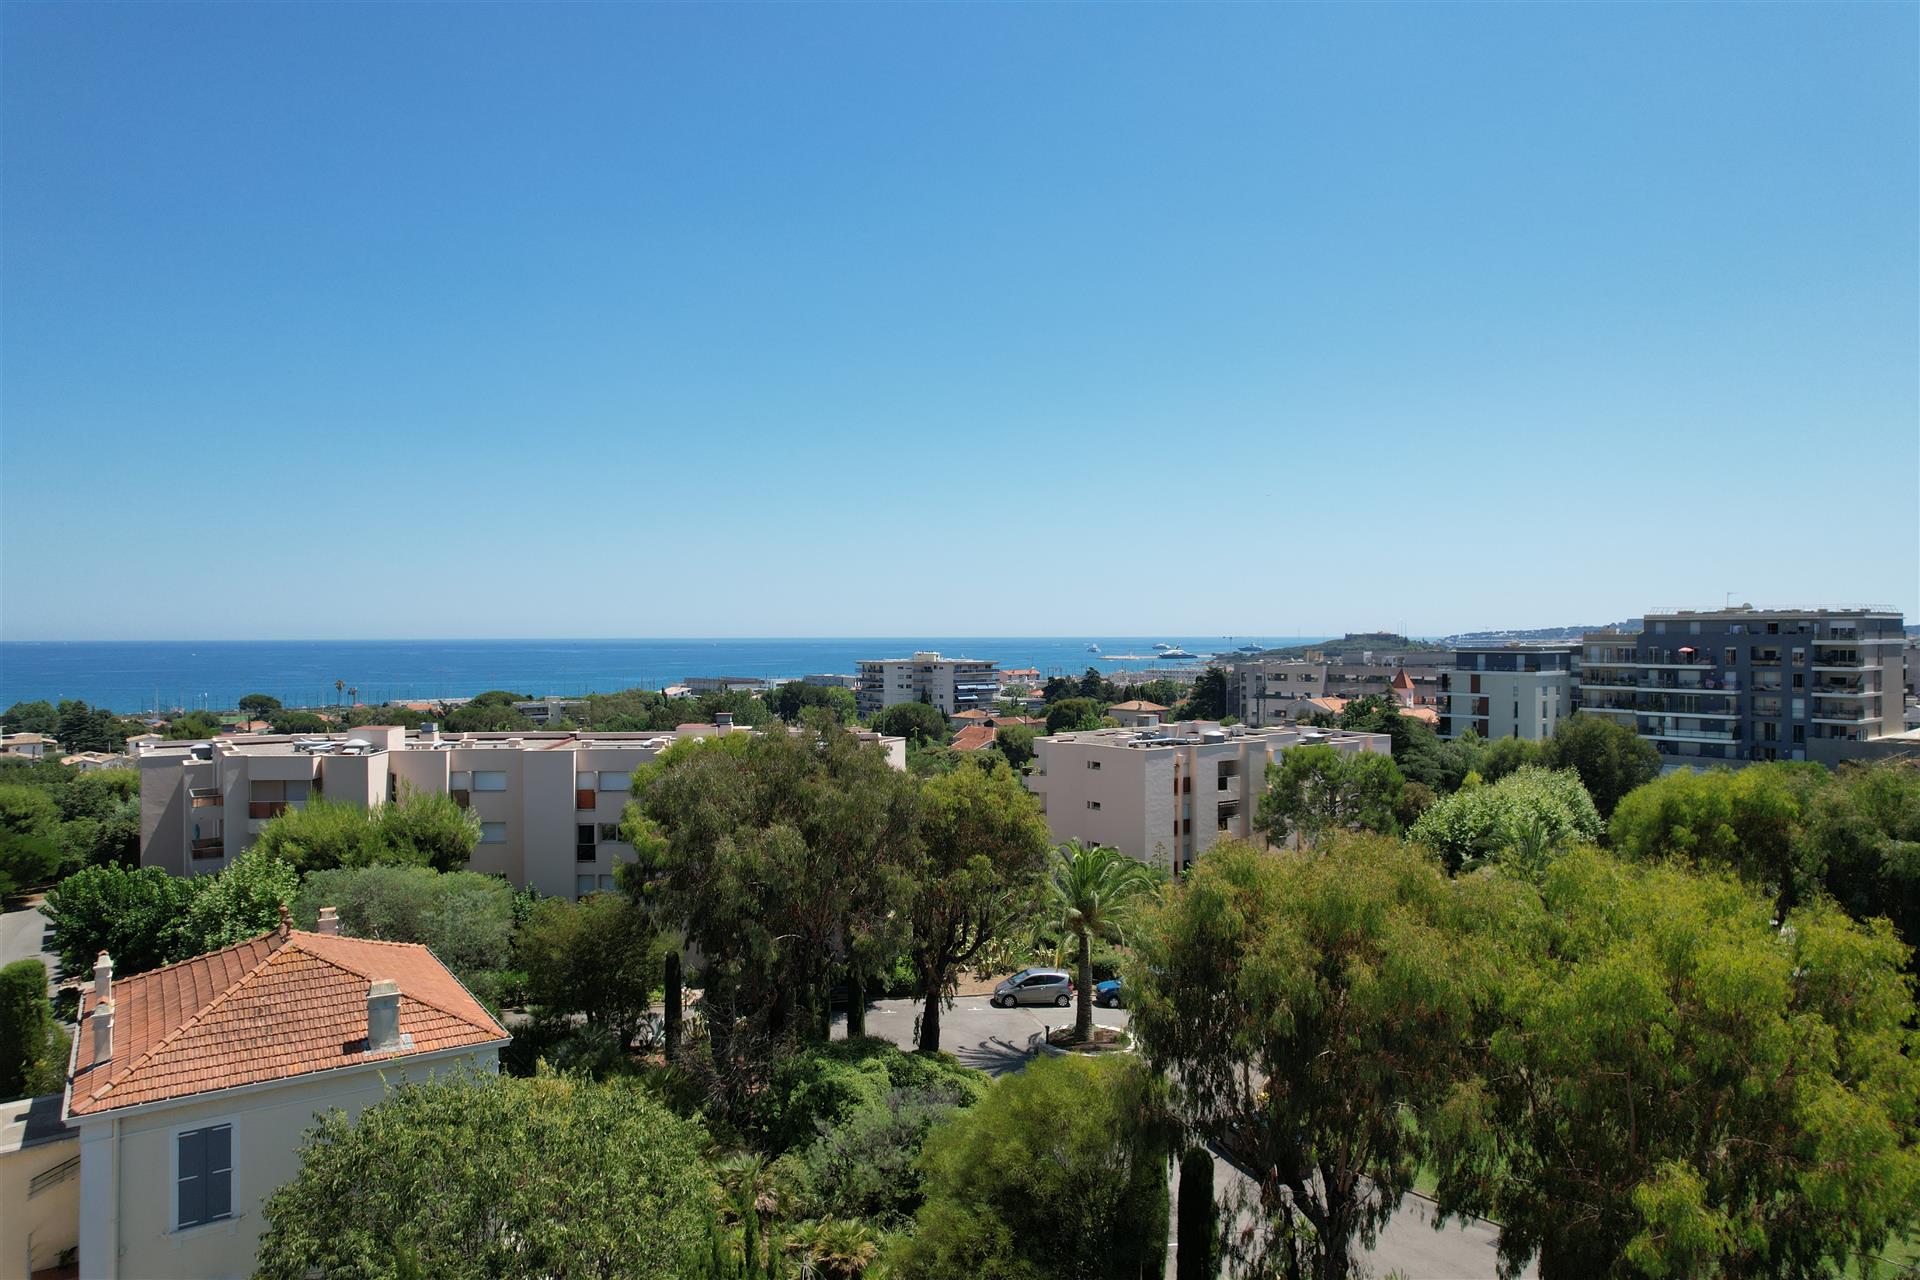 Antibes-Quiet offering sea views from most apartments